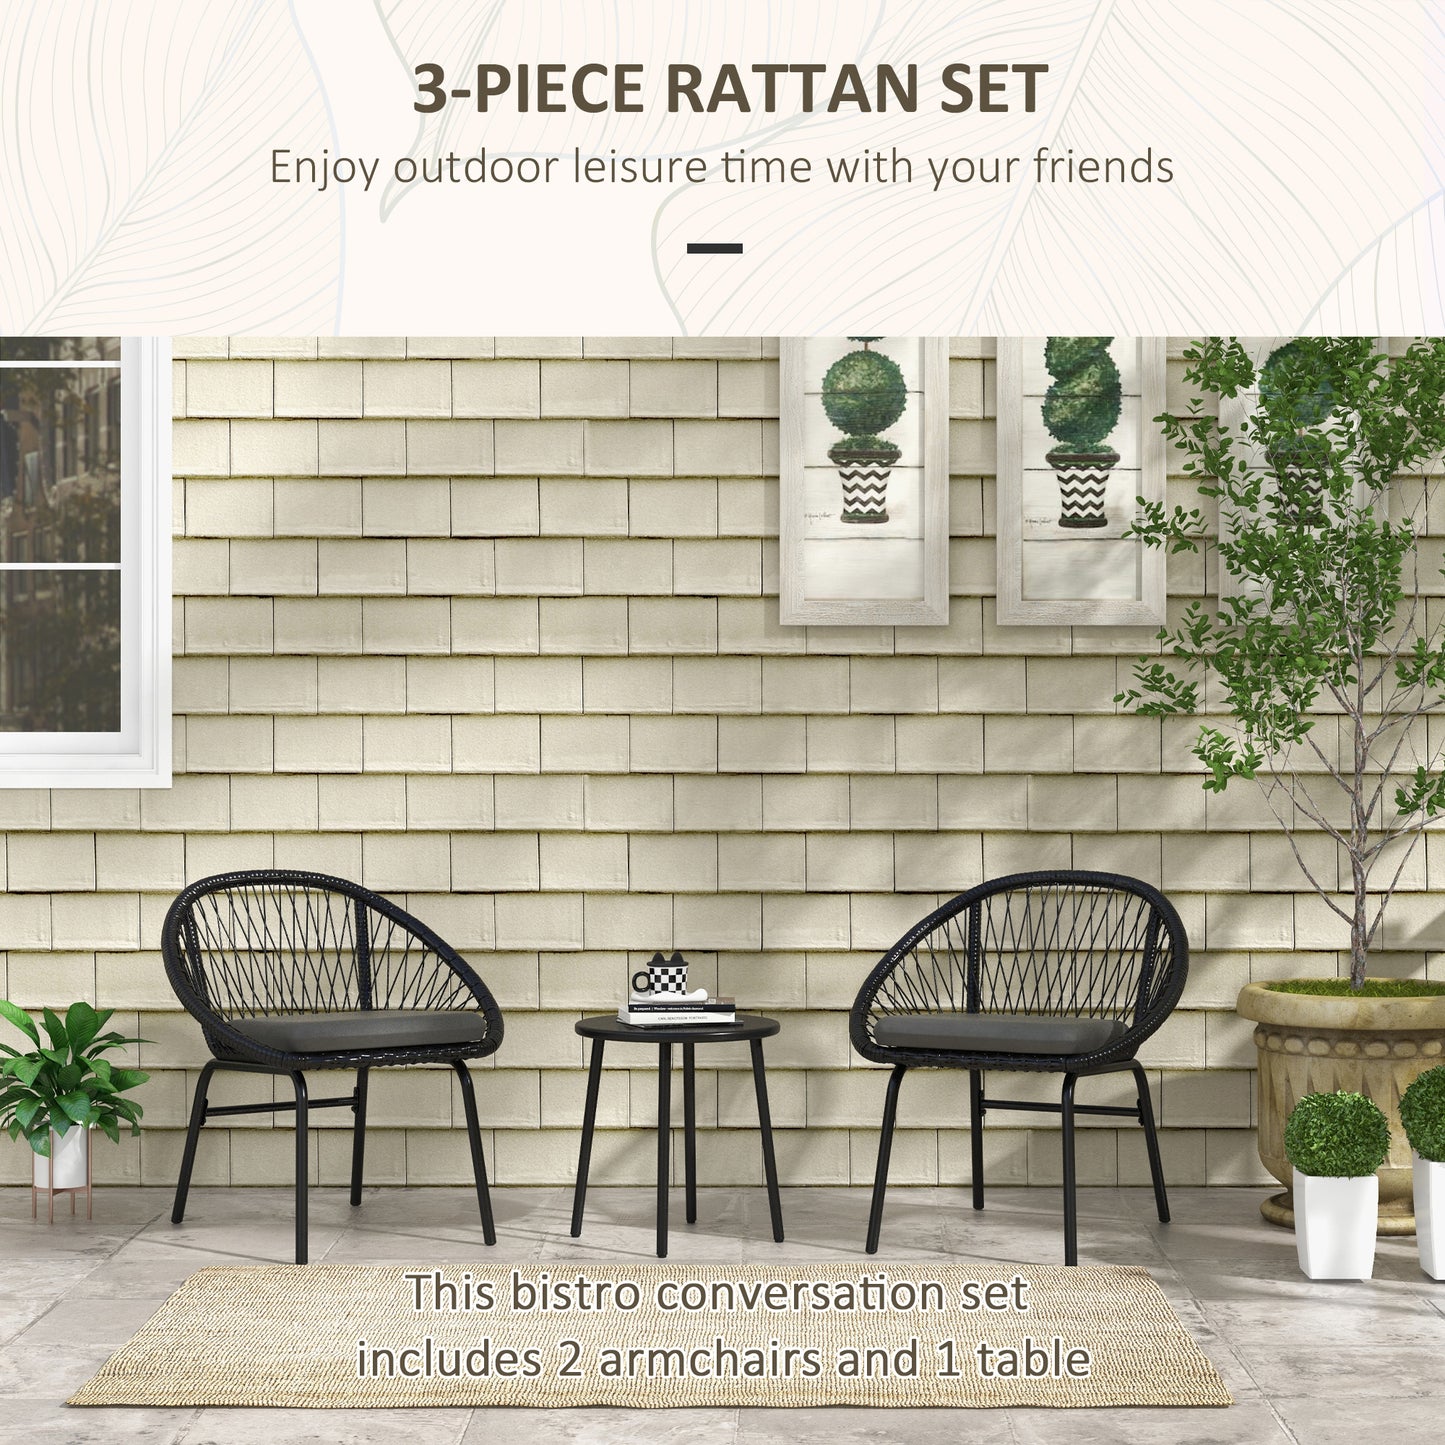 Outsunny 3 Piece Garden Furniture Set with Cushions, Round PE Rattan Bistro Set w/ 2 Armchairs & Metal Plate Coffee Table